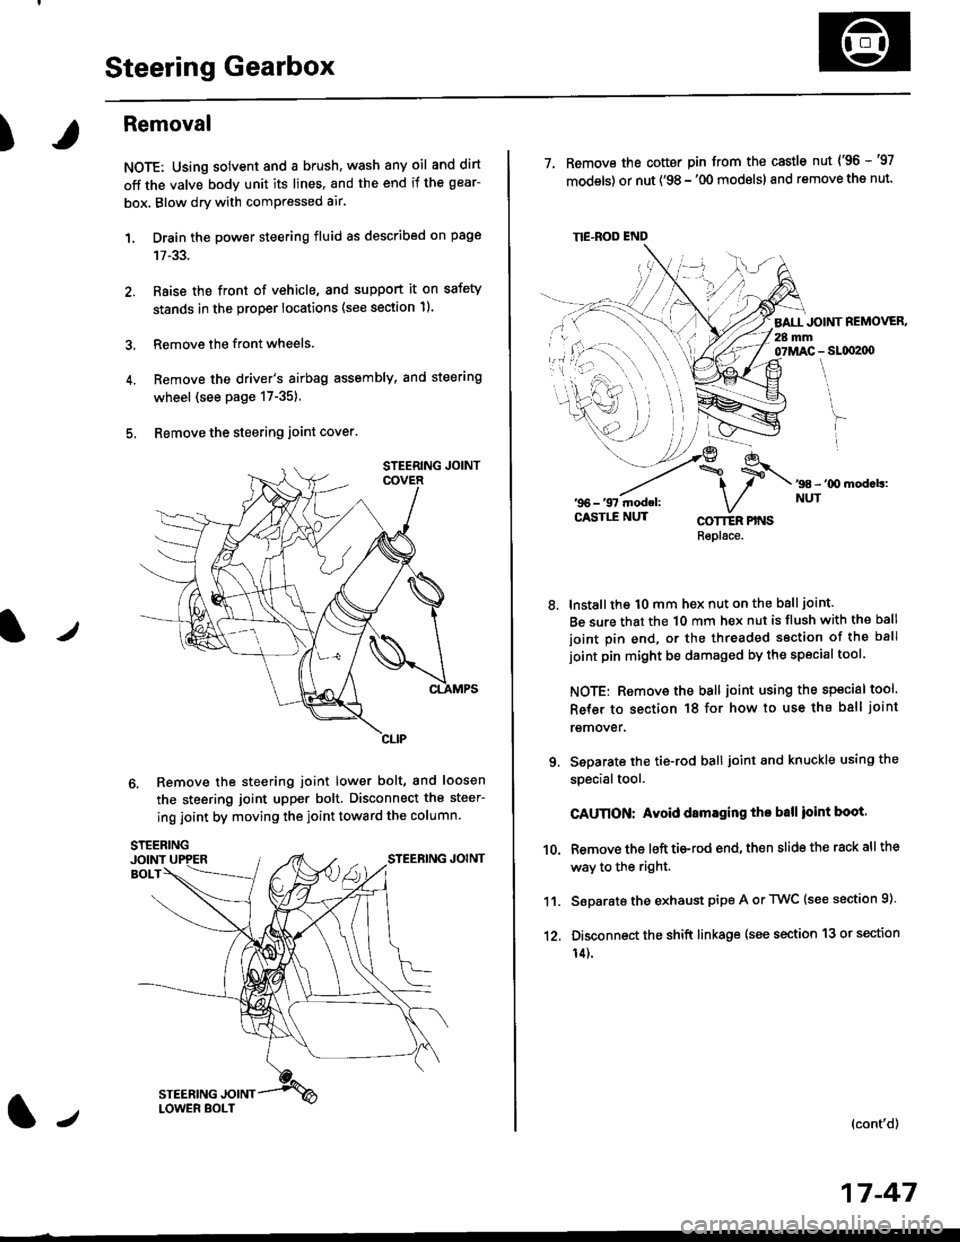 HONDA CIVIC 1998 6.G Owners Guide Steering Gearbox
)
Removal
NOTE: Using solvent and a brush, wash any oil and dirt
off the valve body unit its lines. and the end if the gear-
box. Blow dry with comPressed air.
1. Drain the power stee